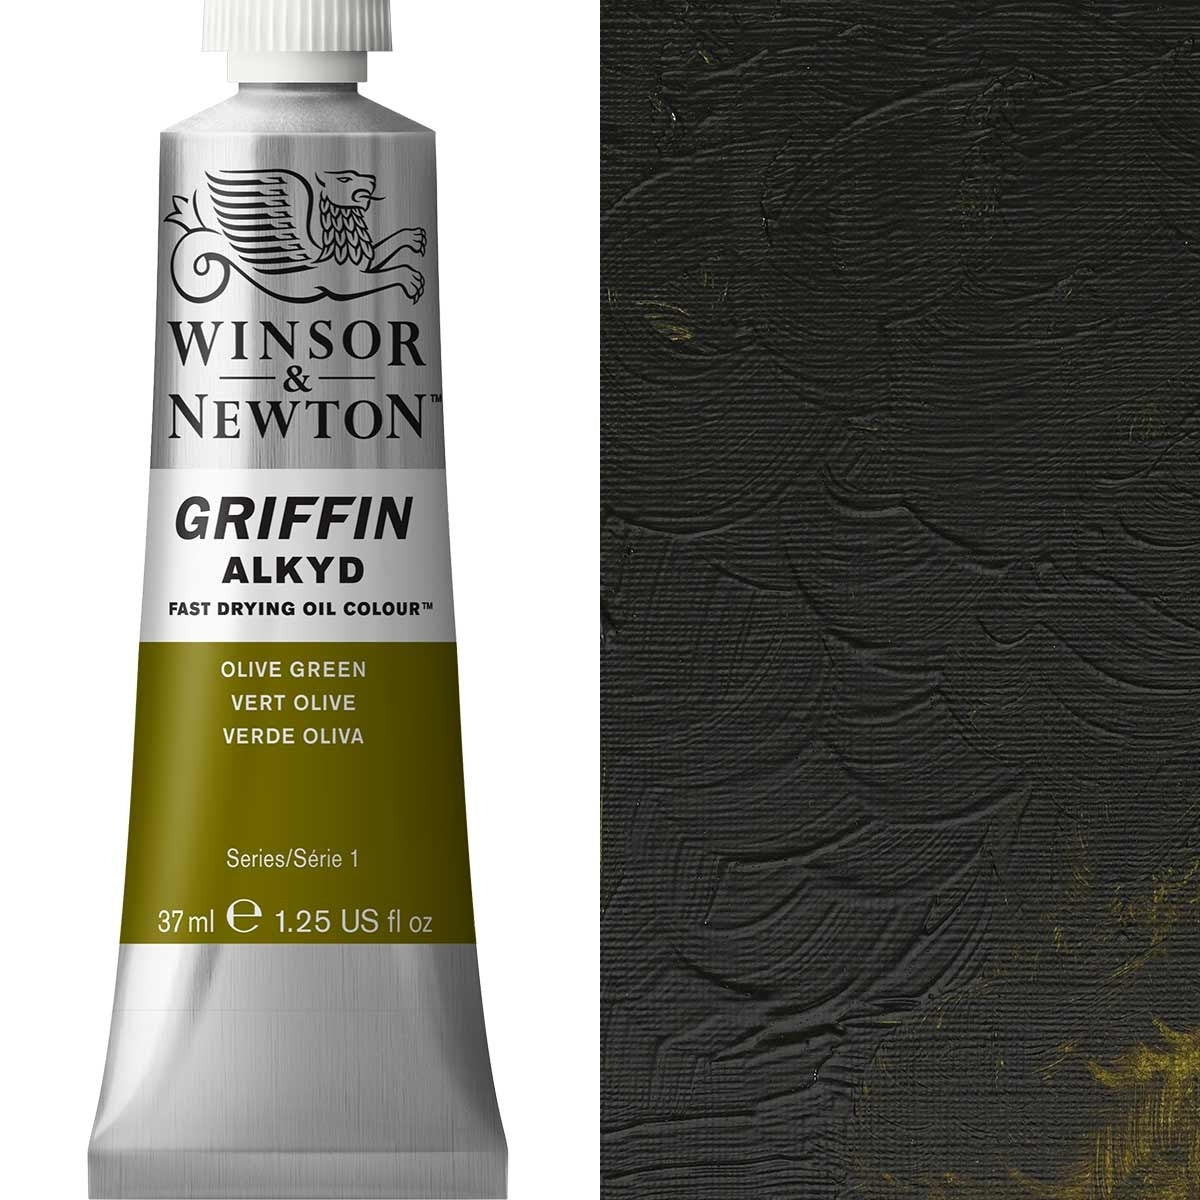 Winsor et Newton - Griffin Alkyd Huile Color - 37 ml - Olive Green